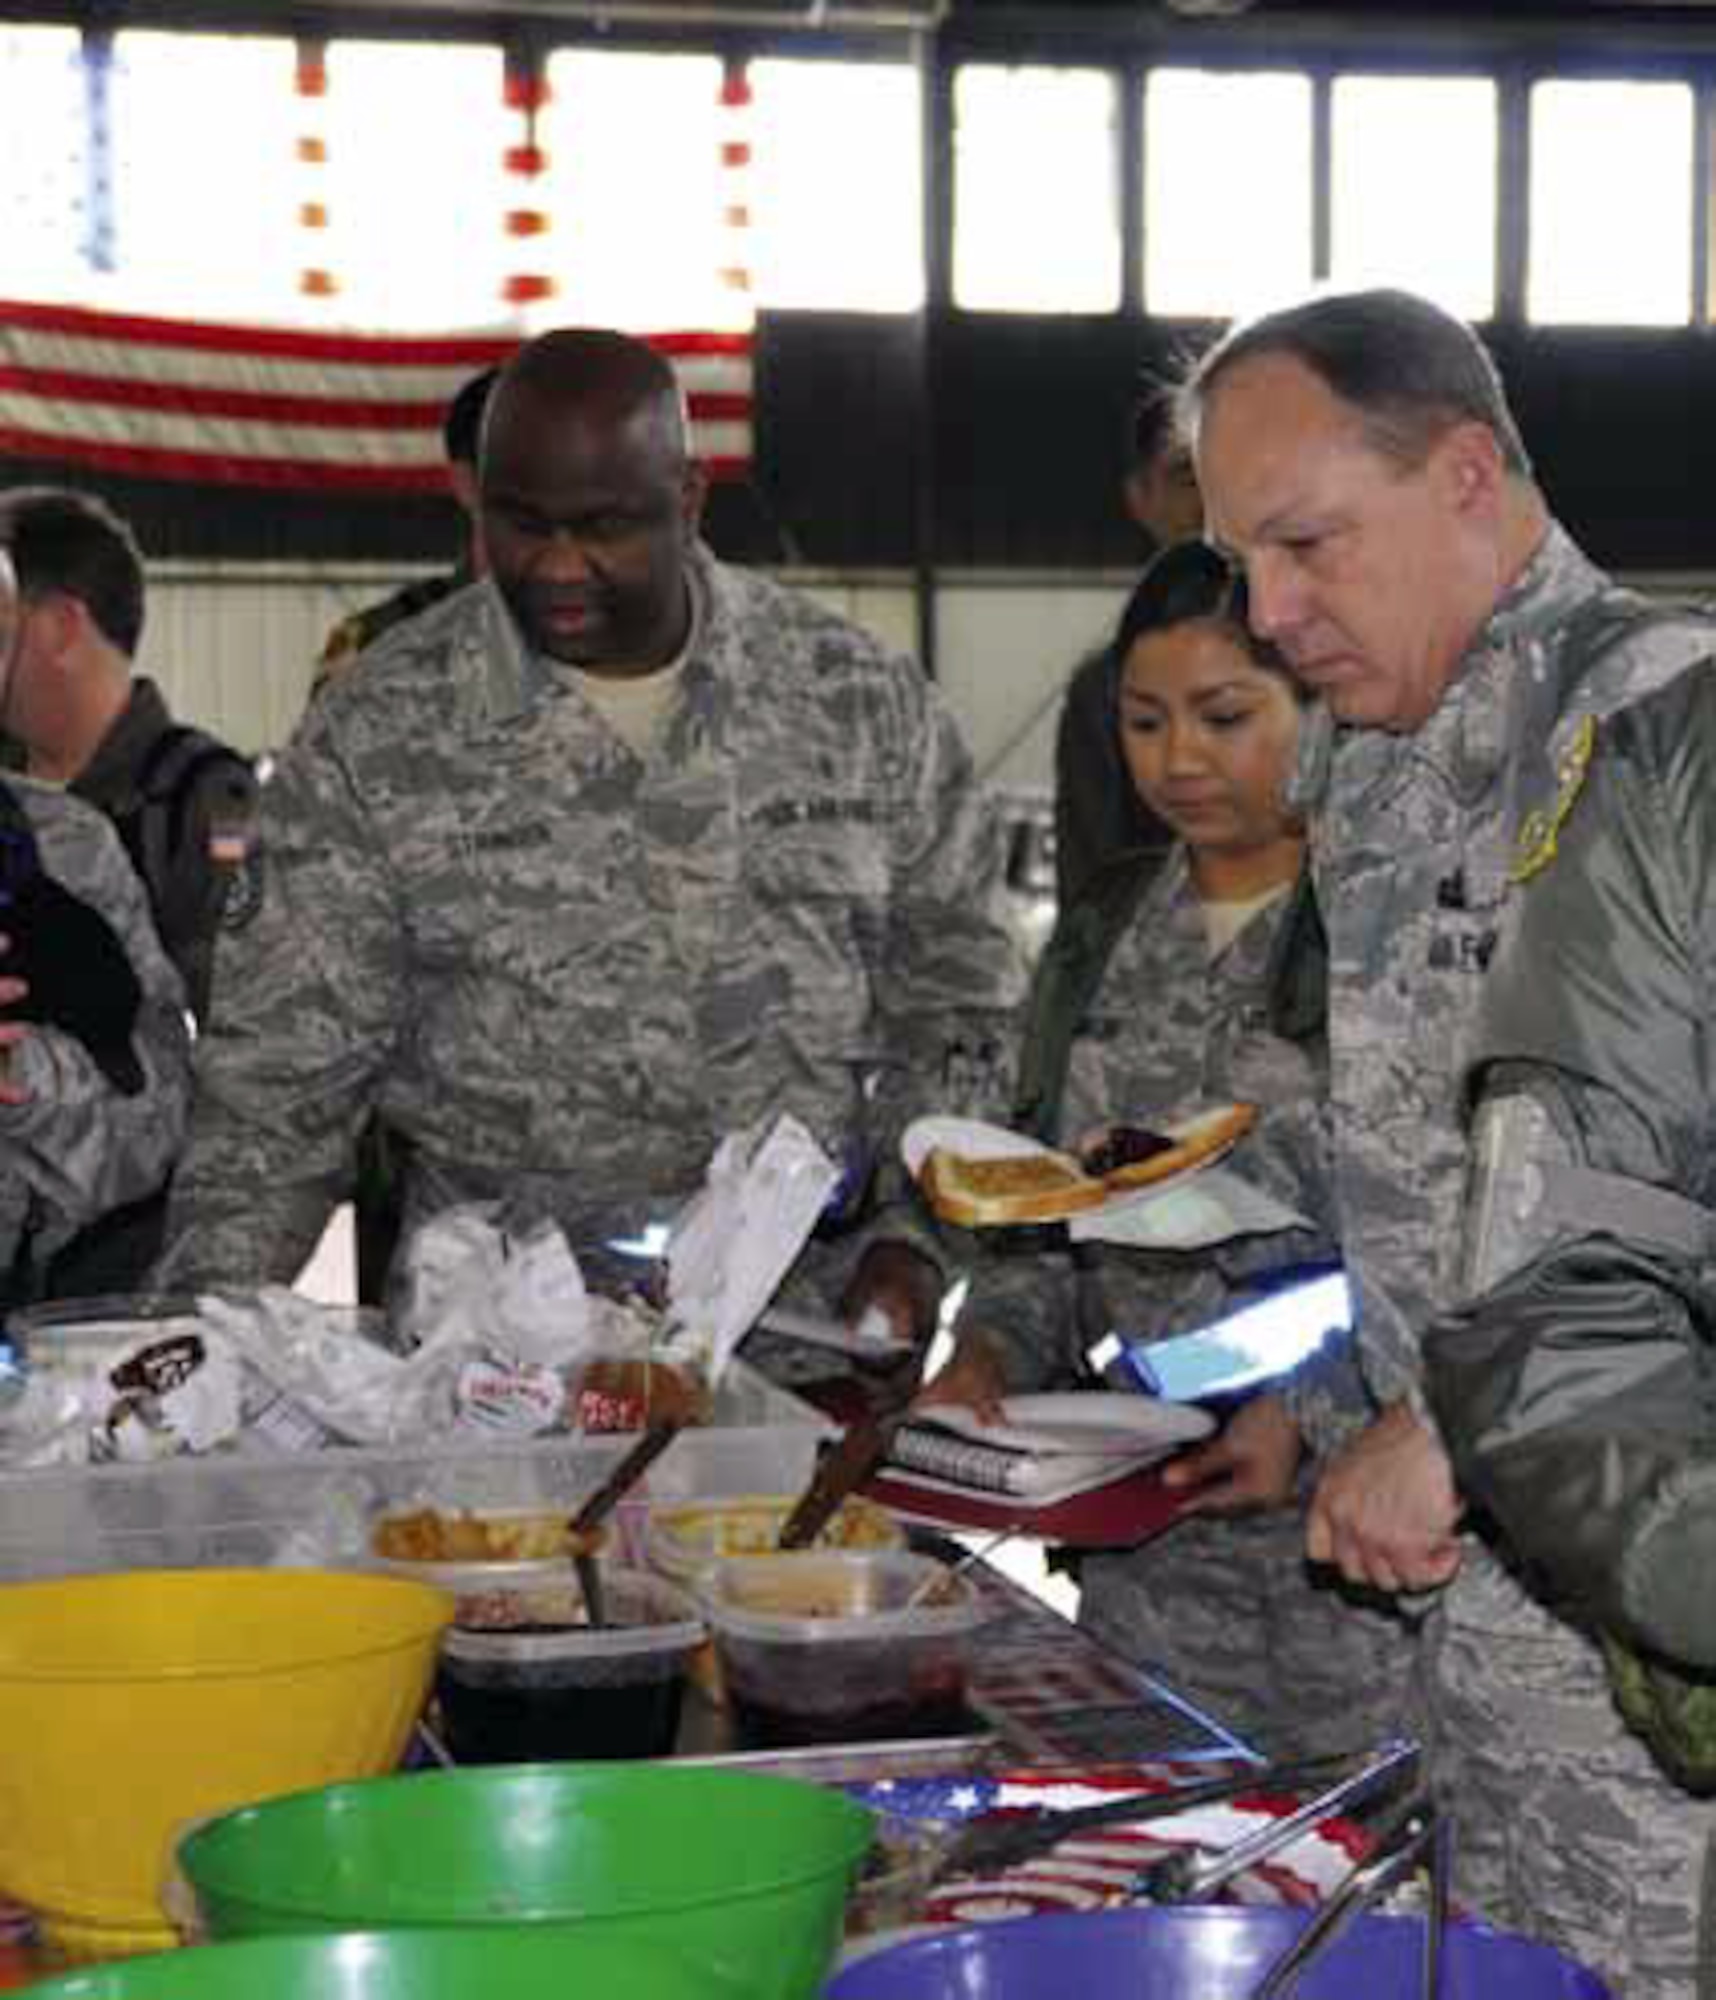 Wing members are treated to some snacks after completing their deployment processing for the Operational Readiness Inspection. (U.S. Air Force photo by Master Sgt. Linda Welz)